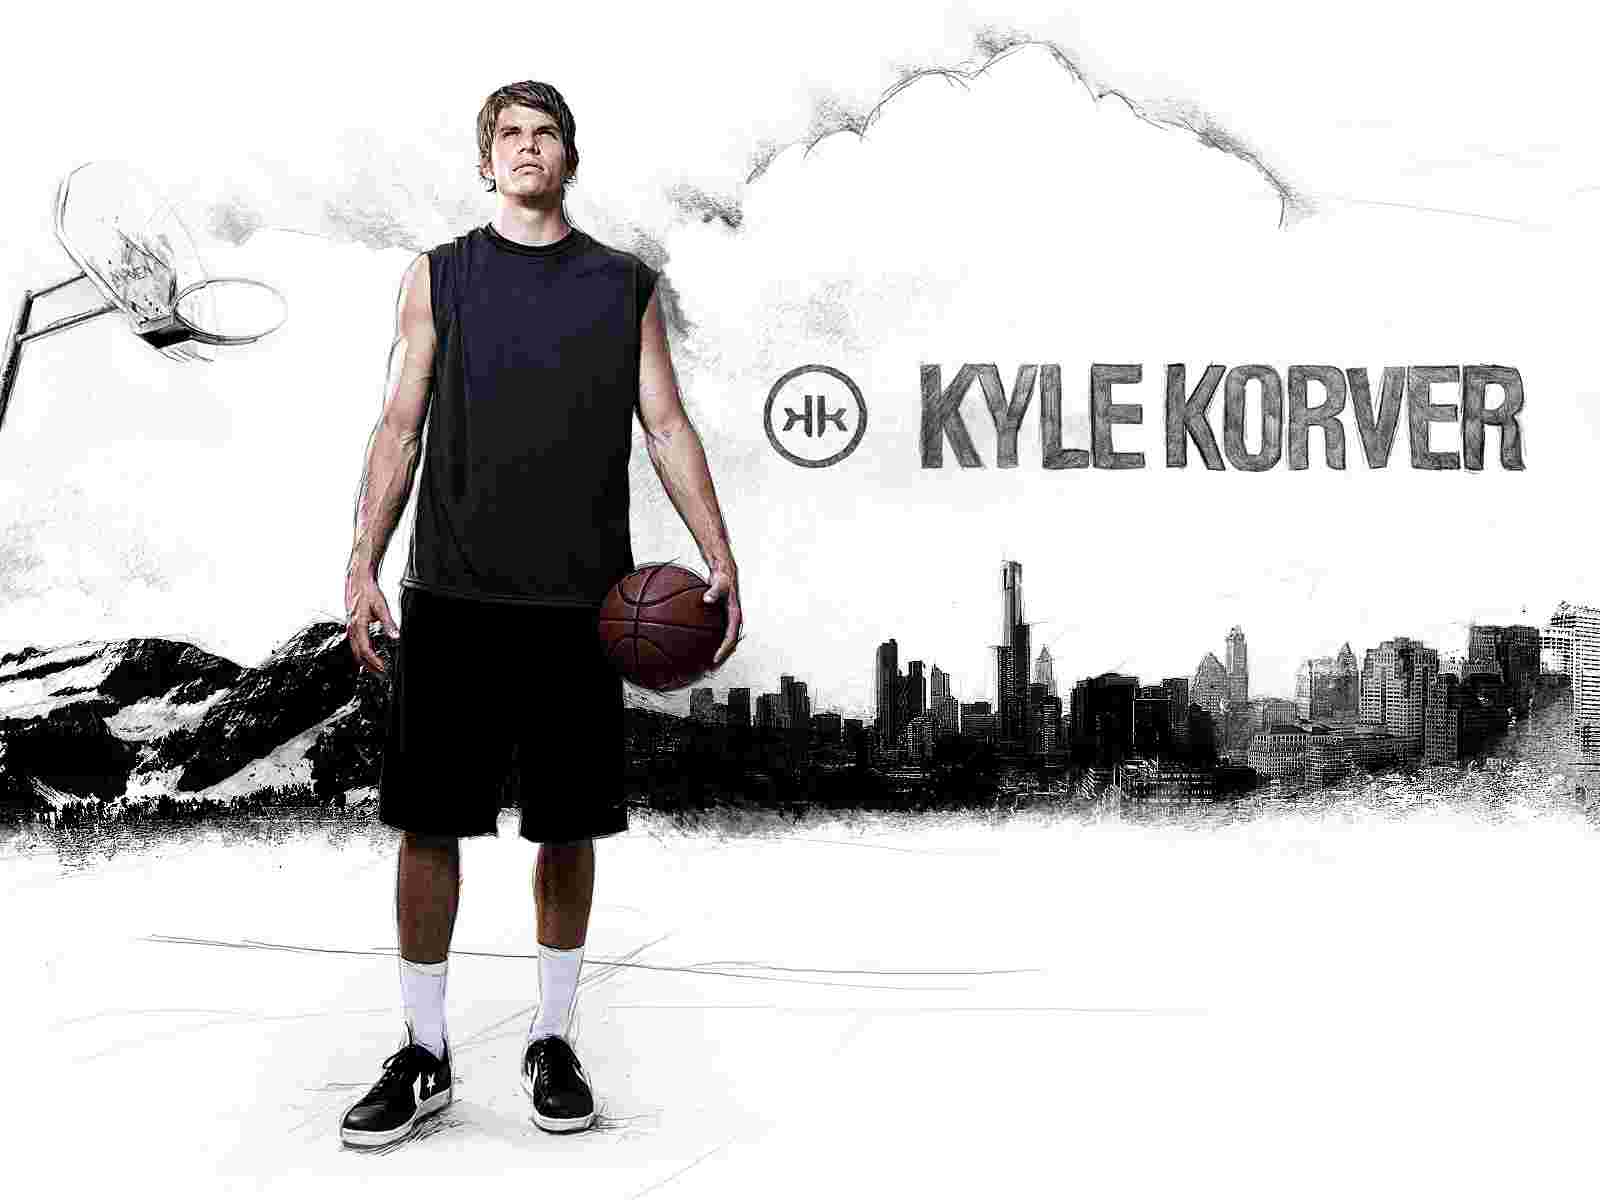 Kyle Korver Wallpaper High Resolution and Quality Download